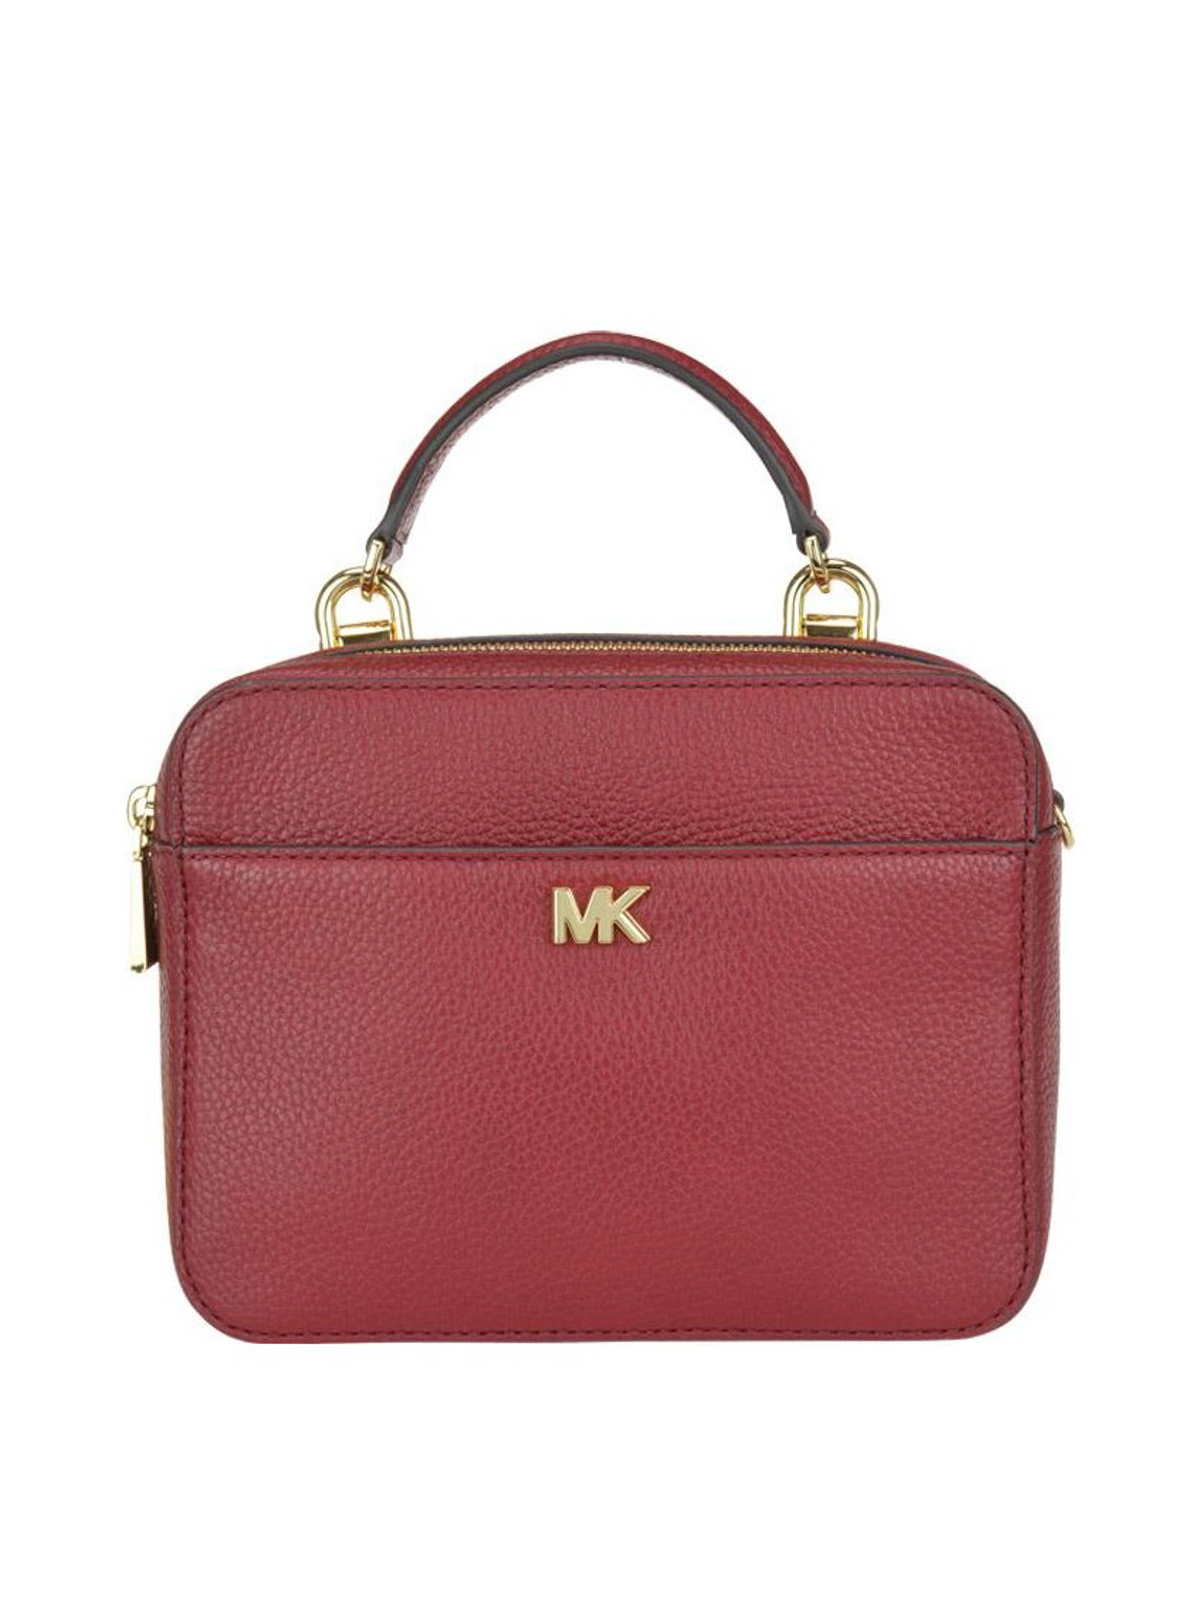 Behov for Årligt passe Cross body bags Michael Kors - Grained leather briefcase style bag -  32T8GF5C2L550